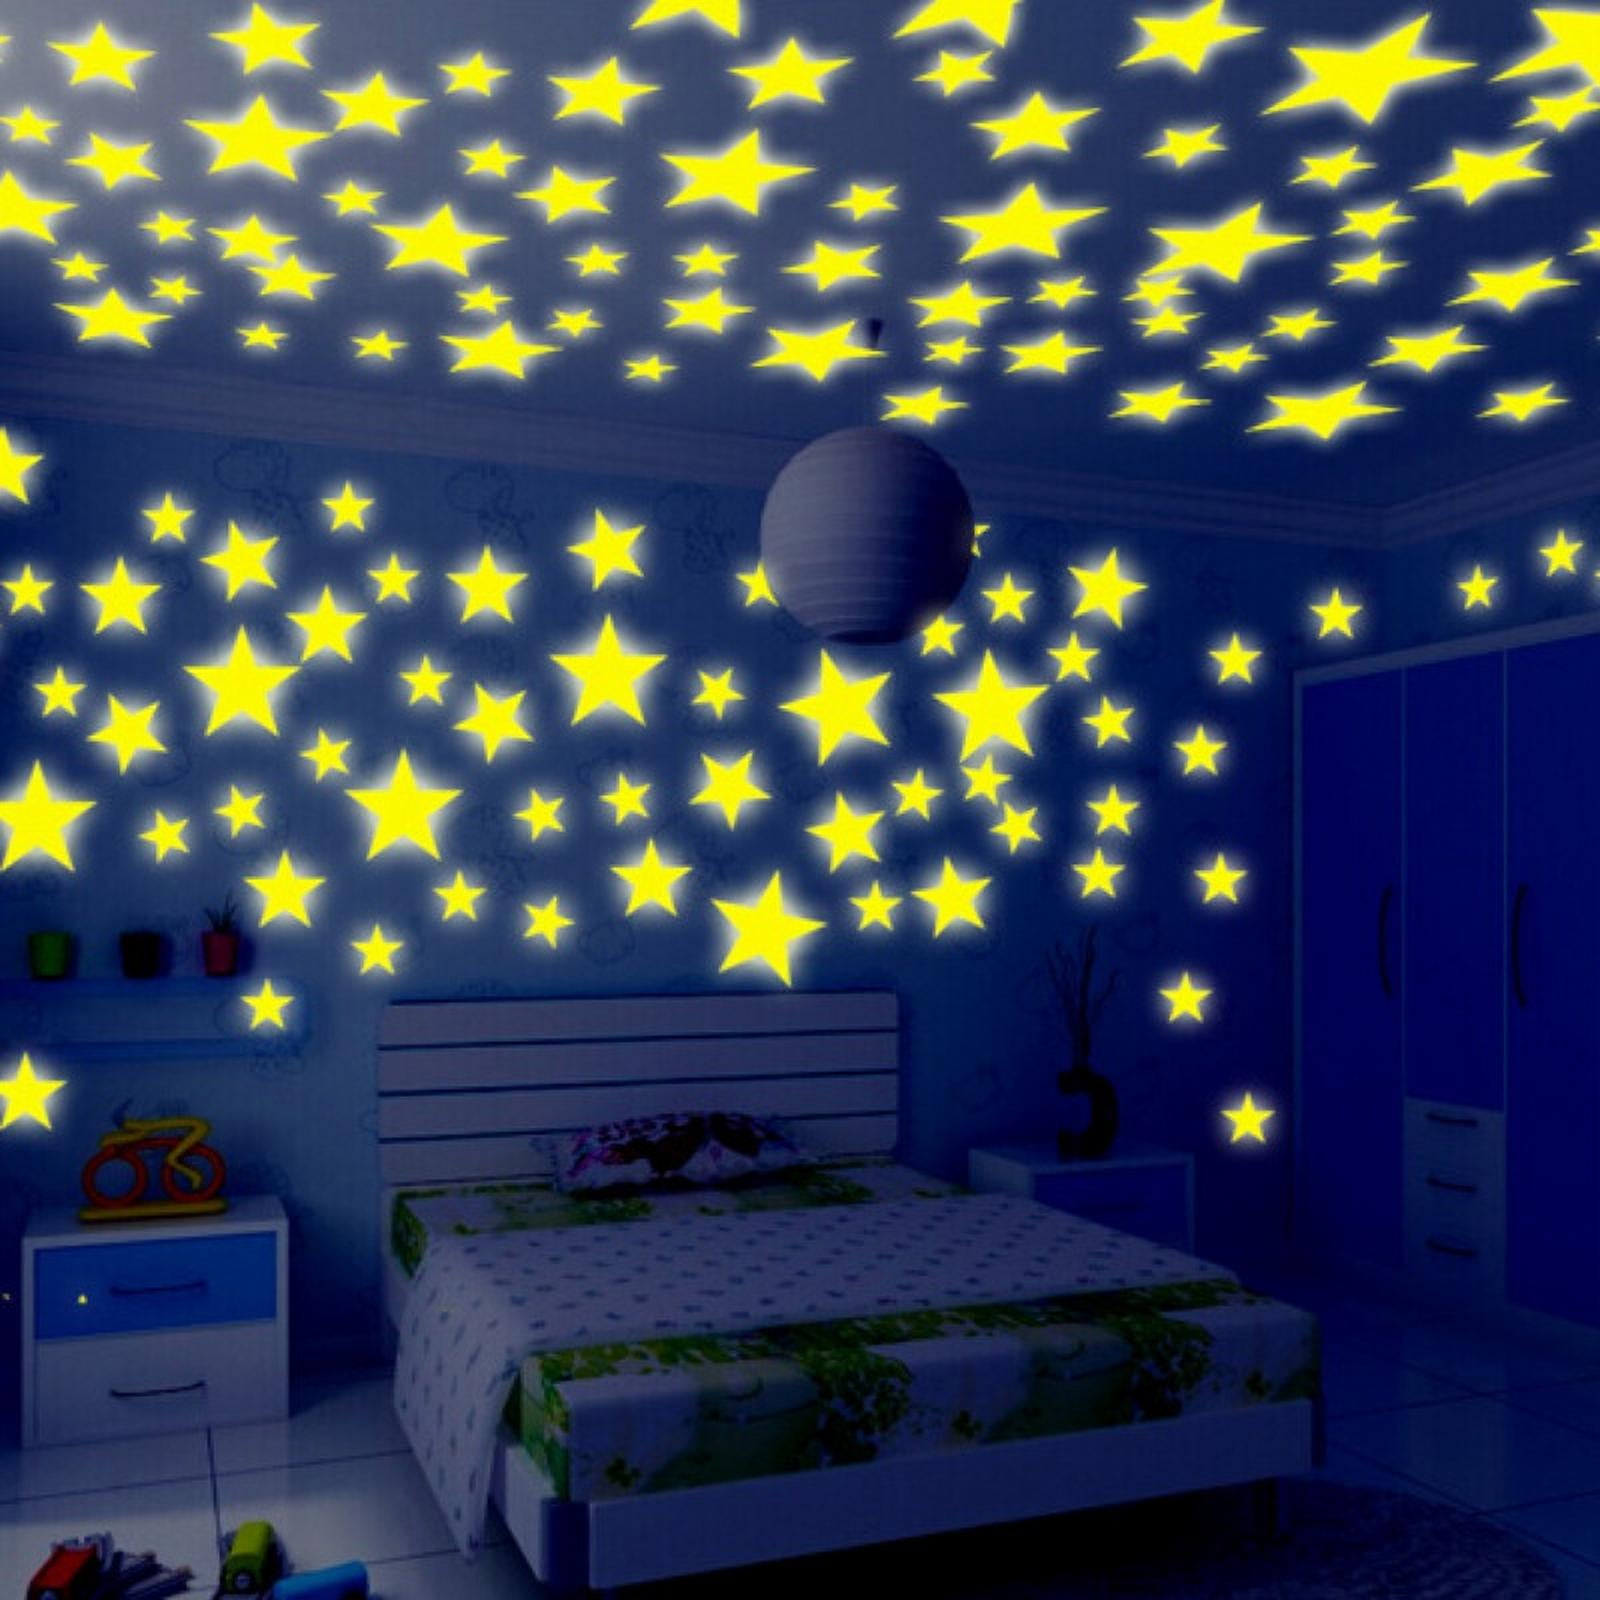 100 GLOW IN THE DARK REAL MOON AND STARS Bedroom Wall Stickers ceiling Kids 